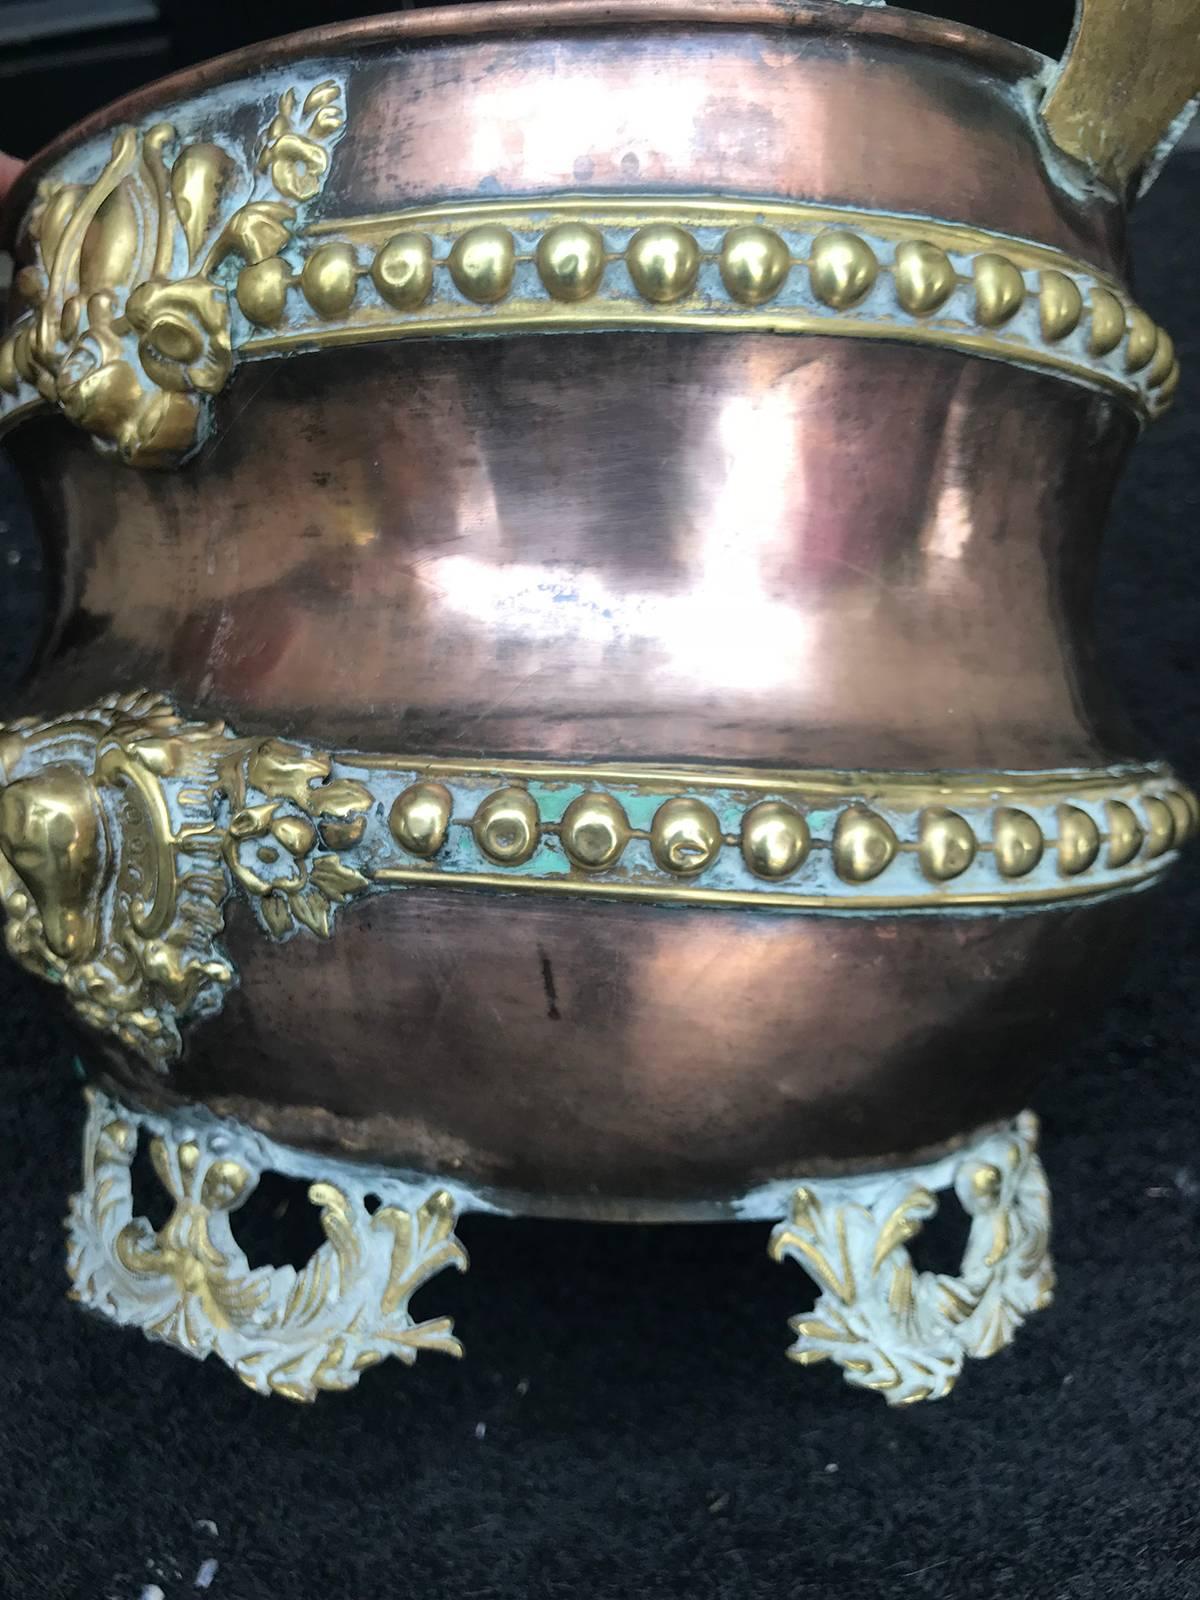 Late 19th century copper or brass cachepot.